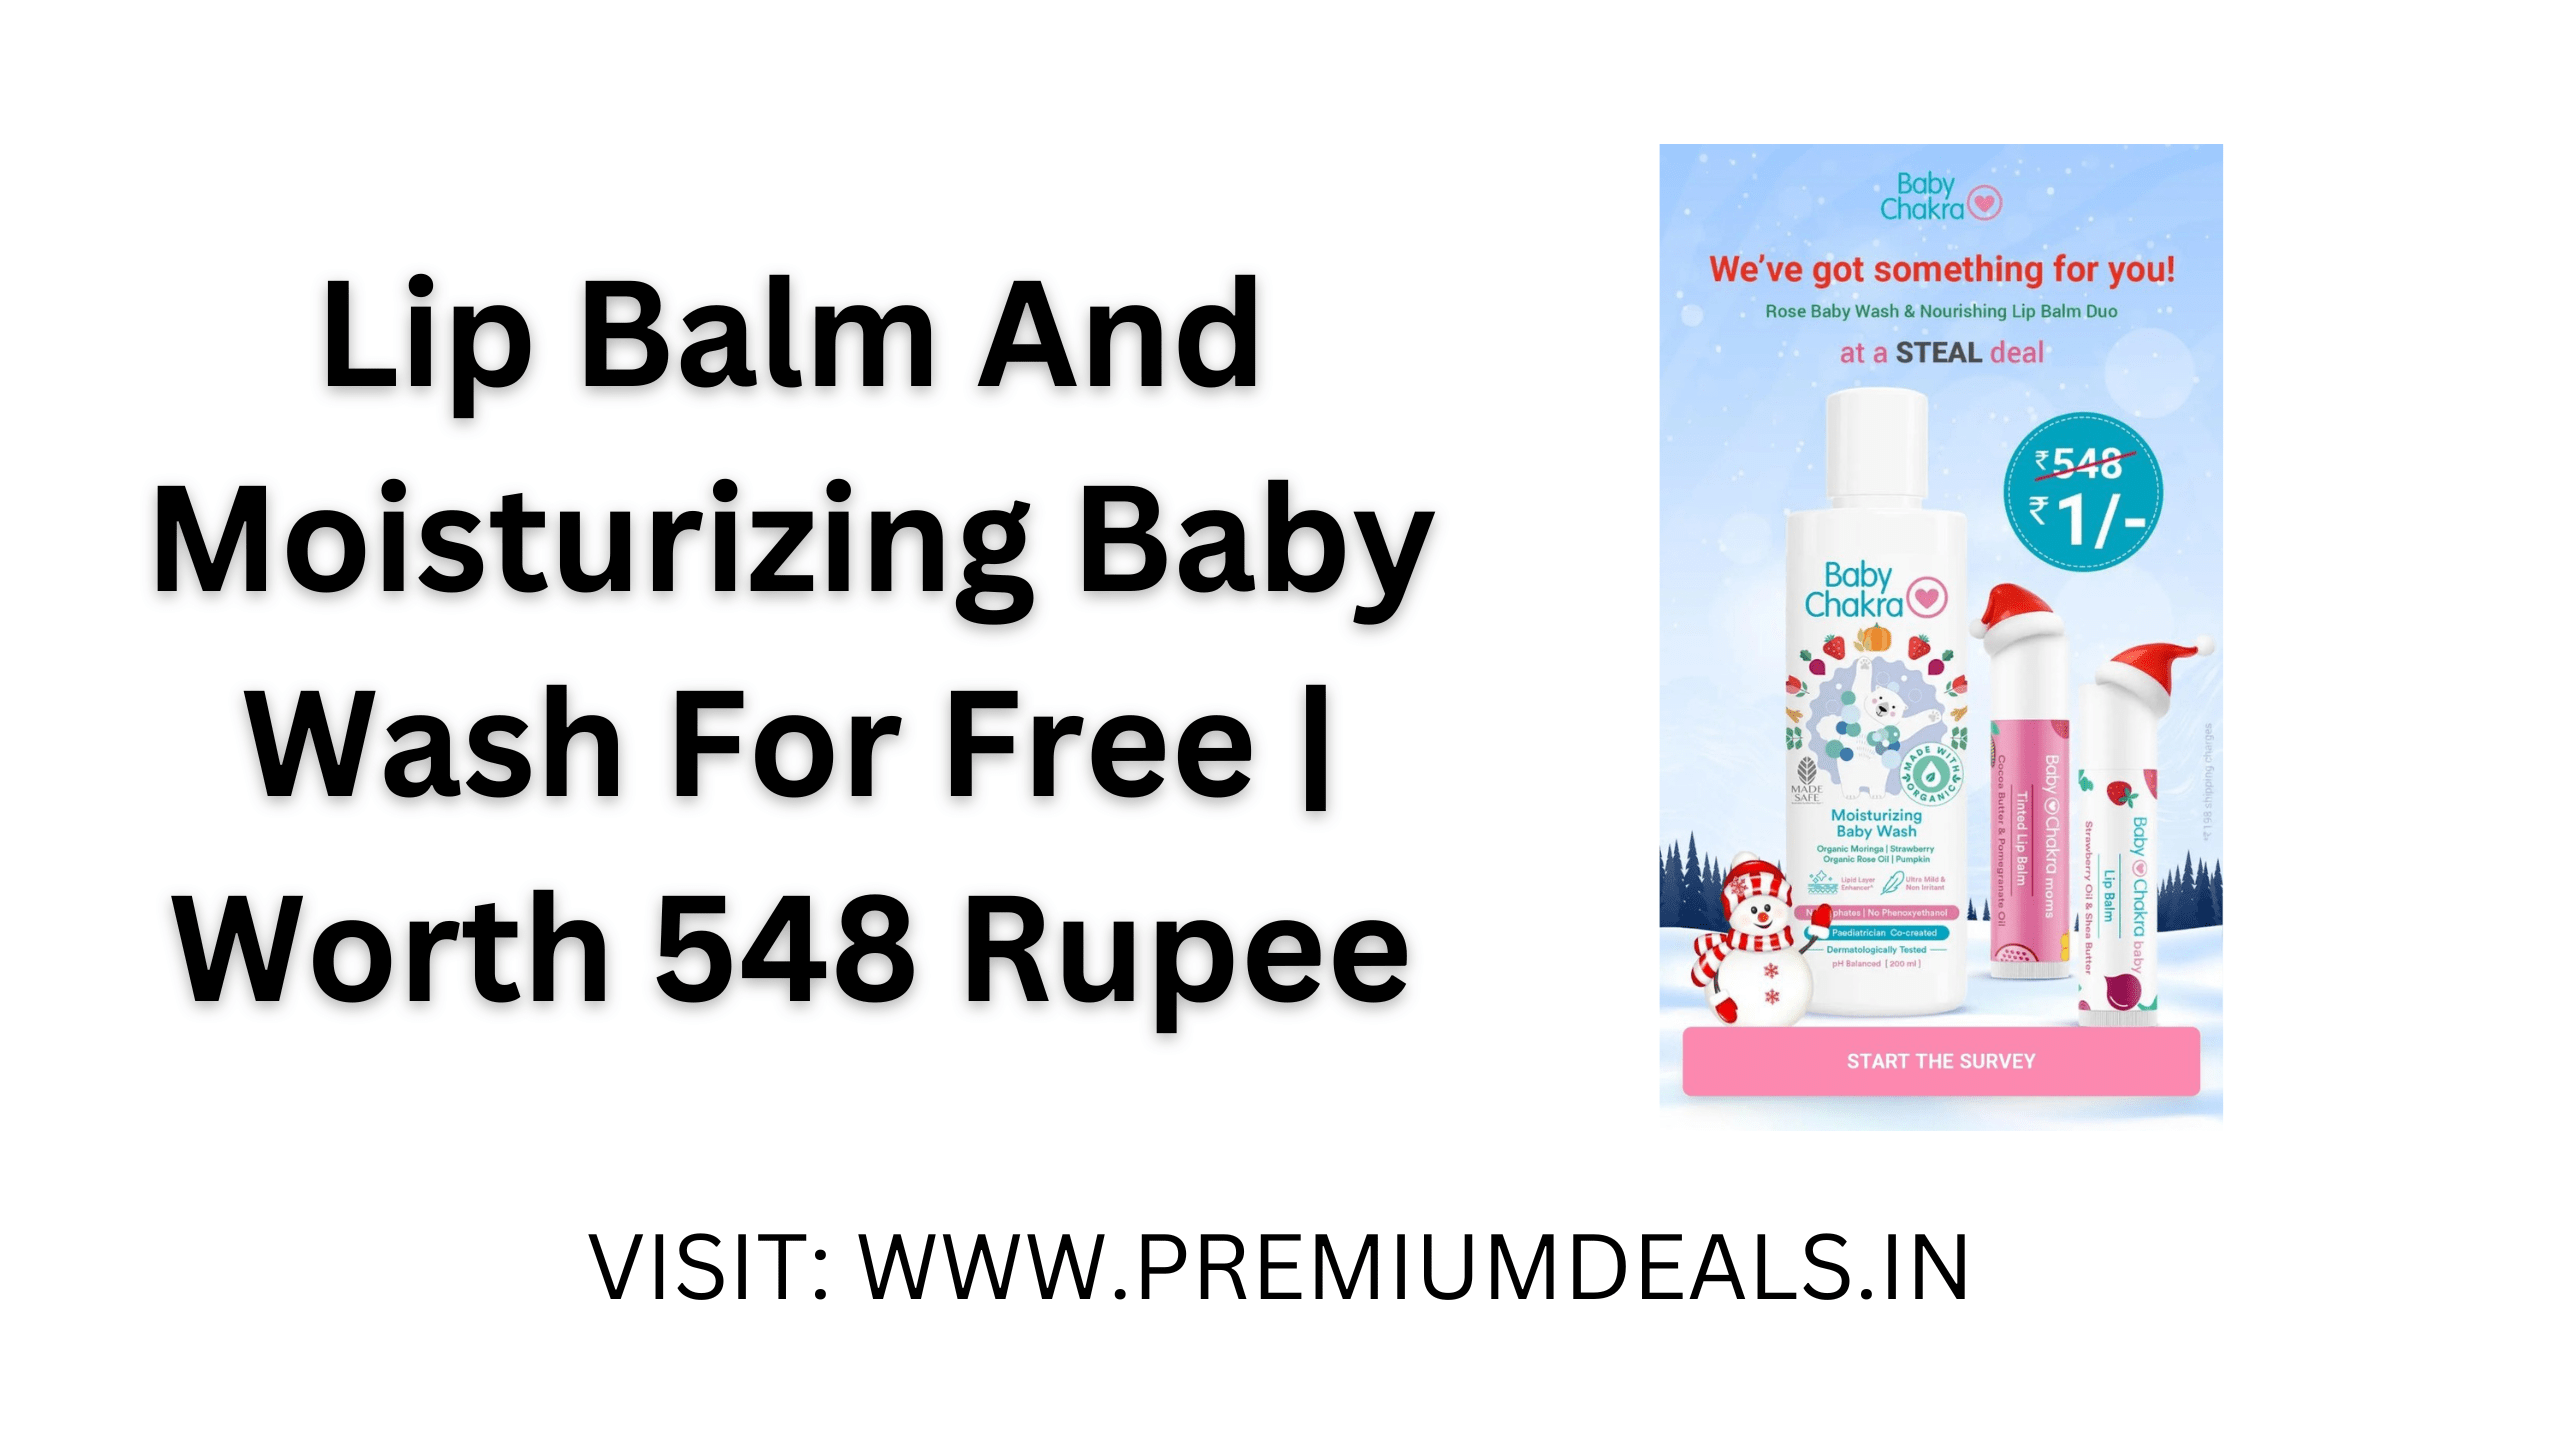 How to get Lip Balm and Moisturizing Baby Wash Free